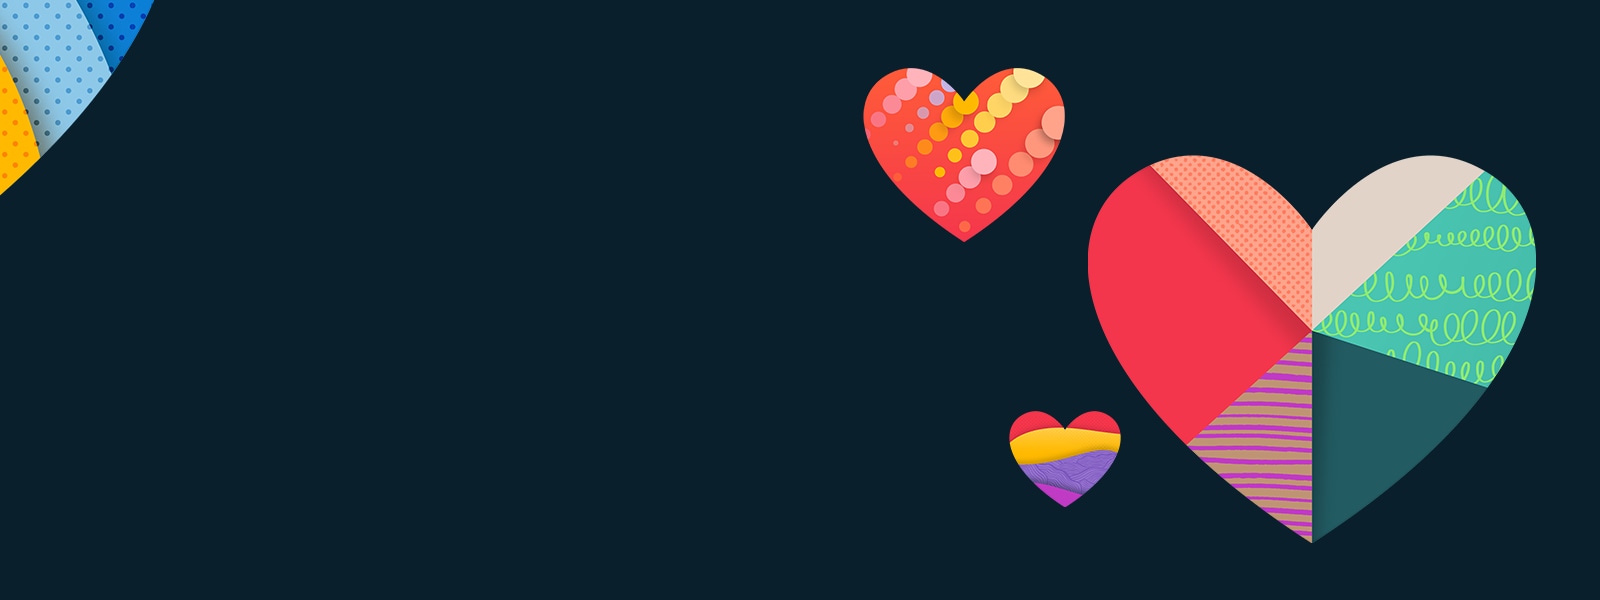 Colorful stylized hearts on a dark blue background.